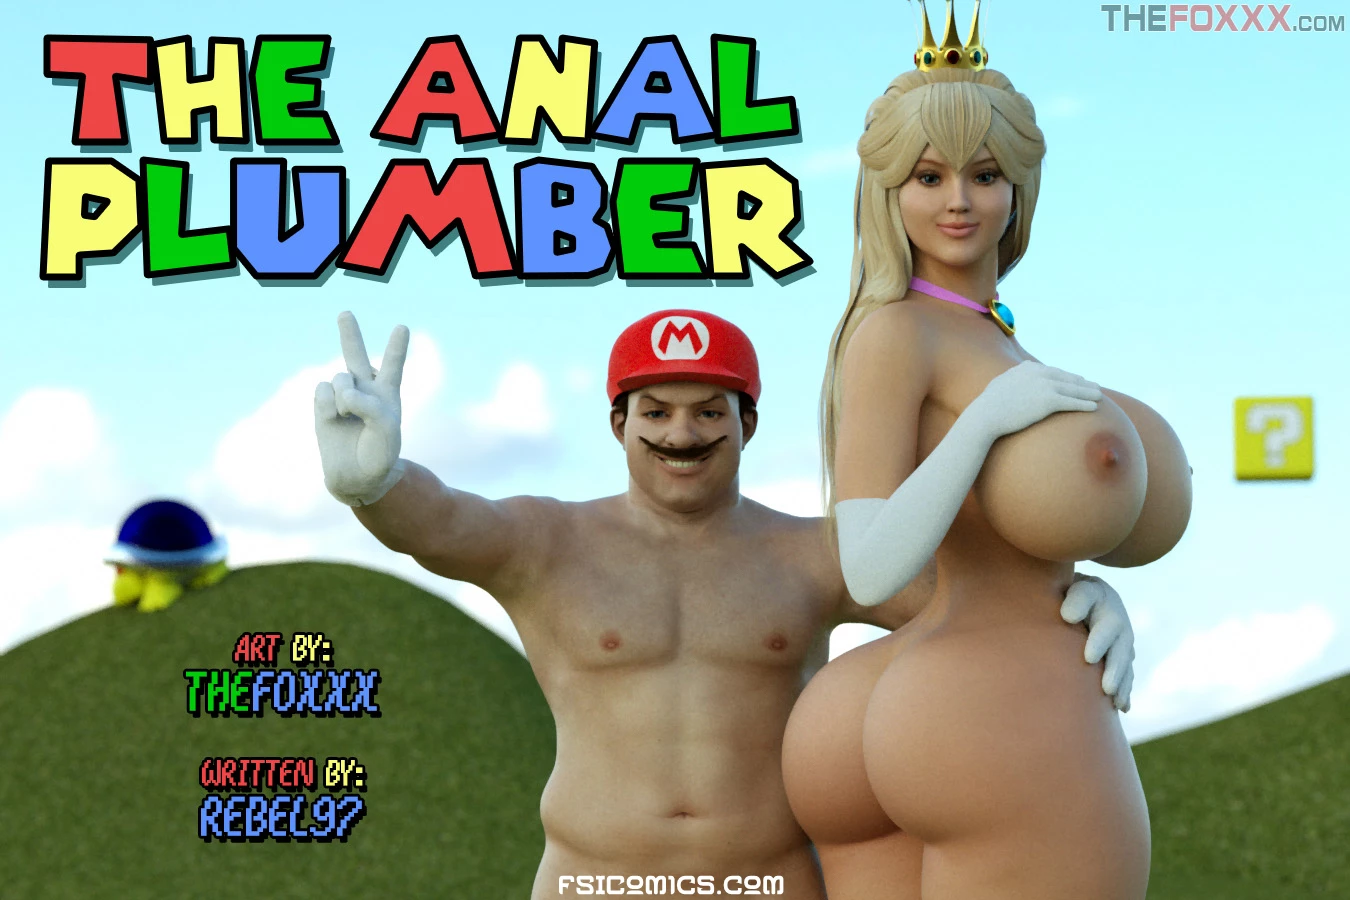 The Anal Plumber Chapter 1 – The FOXXX - 83 - FSIComics